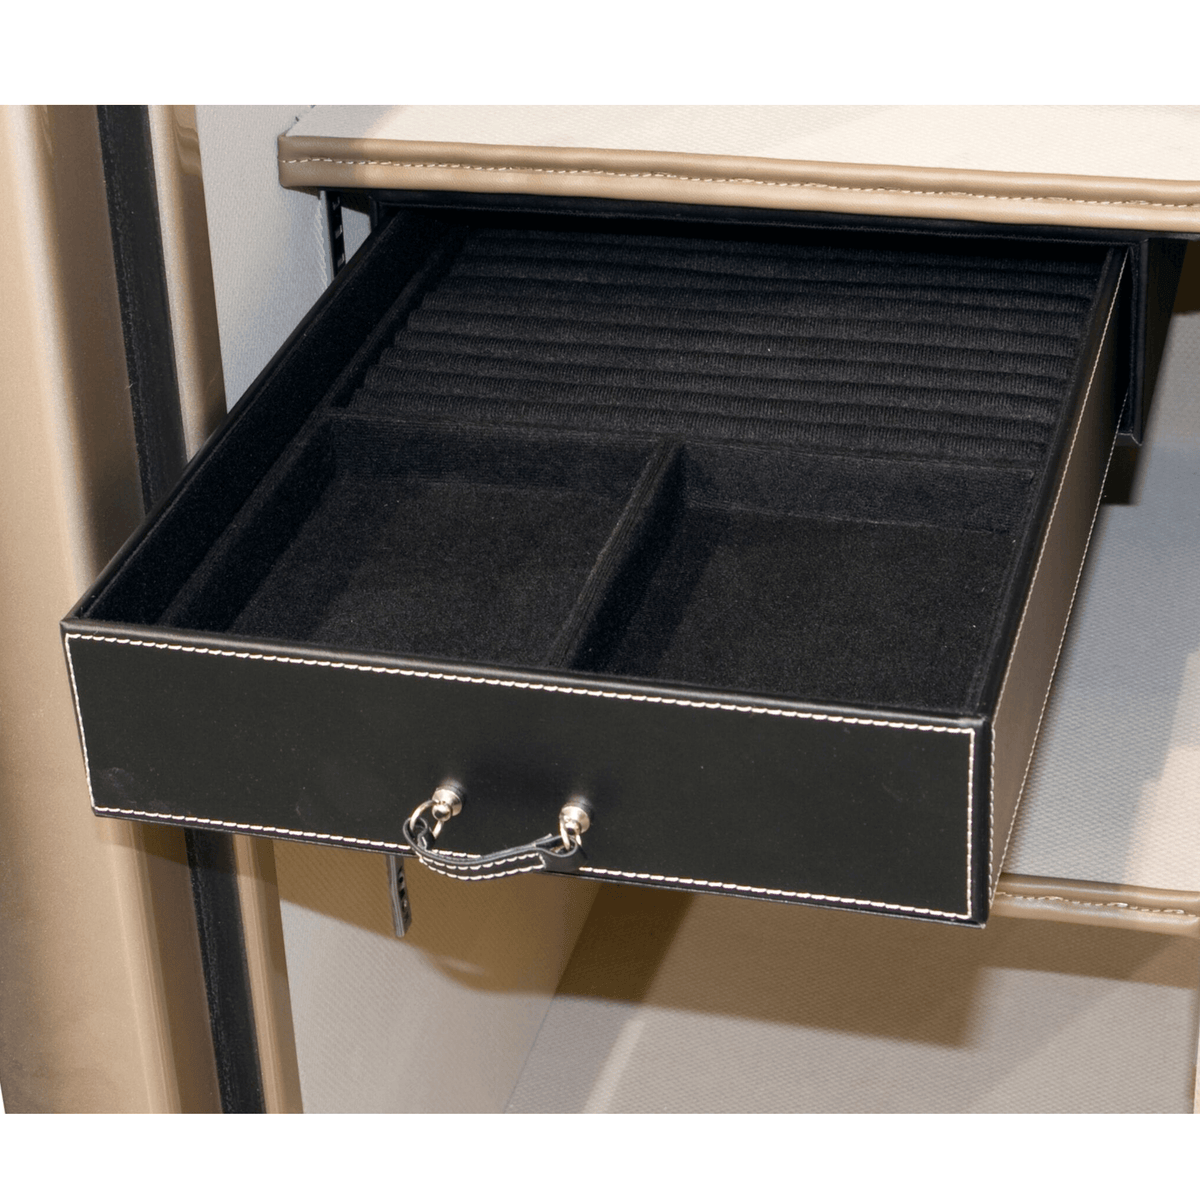 Accessory - Storage - Jewelry Drawer - 11.5 inch - under shelf mount - 35-50 size safes | Liberty Safe Norcal.